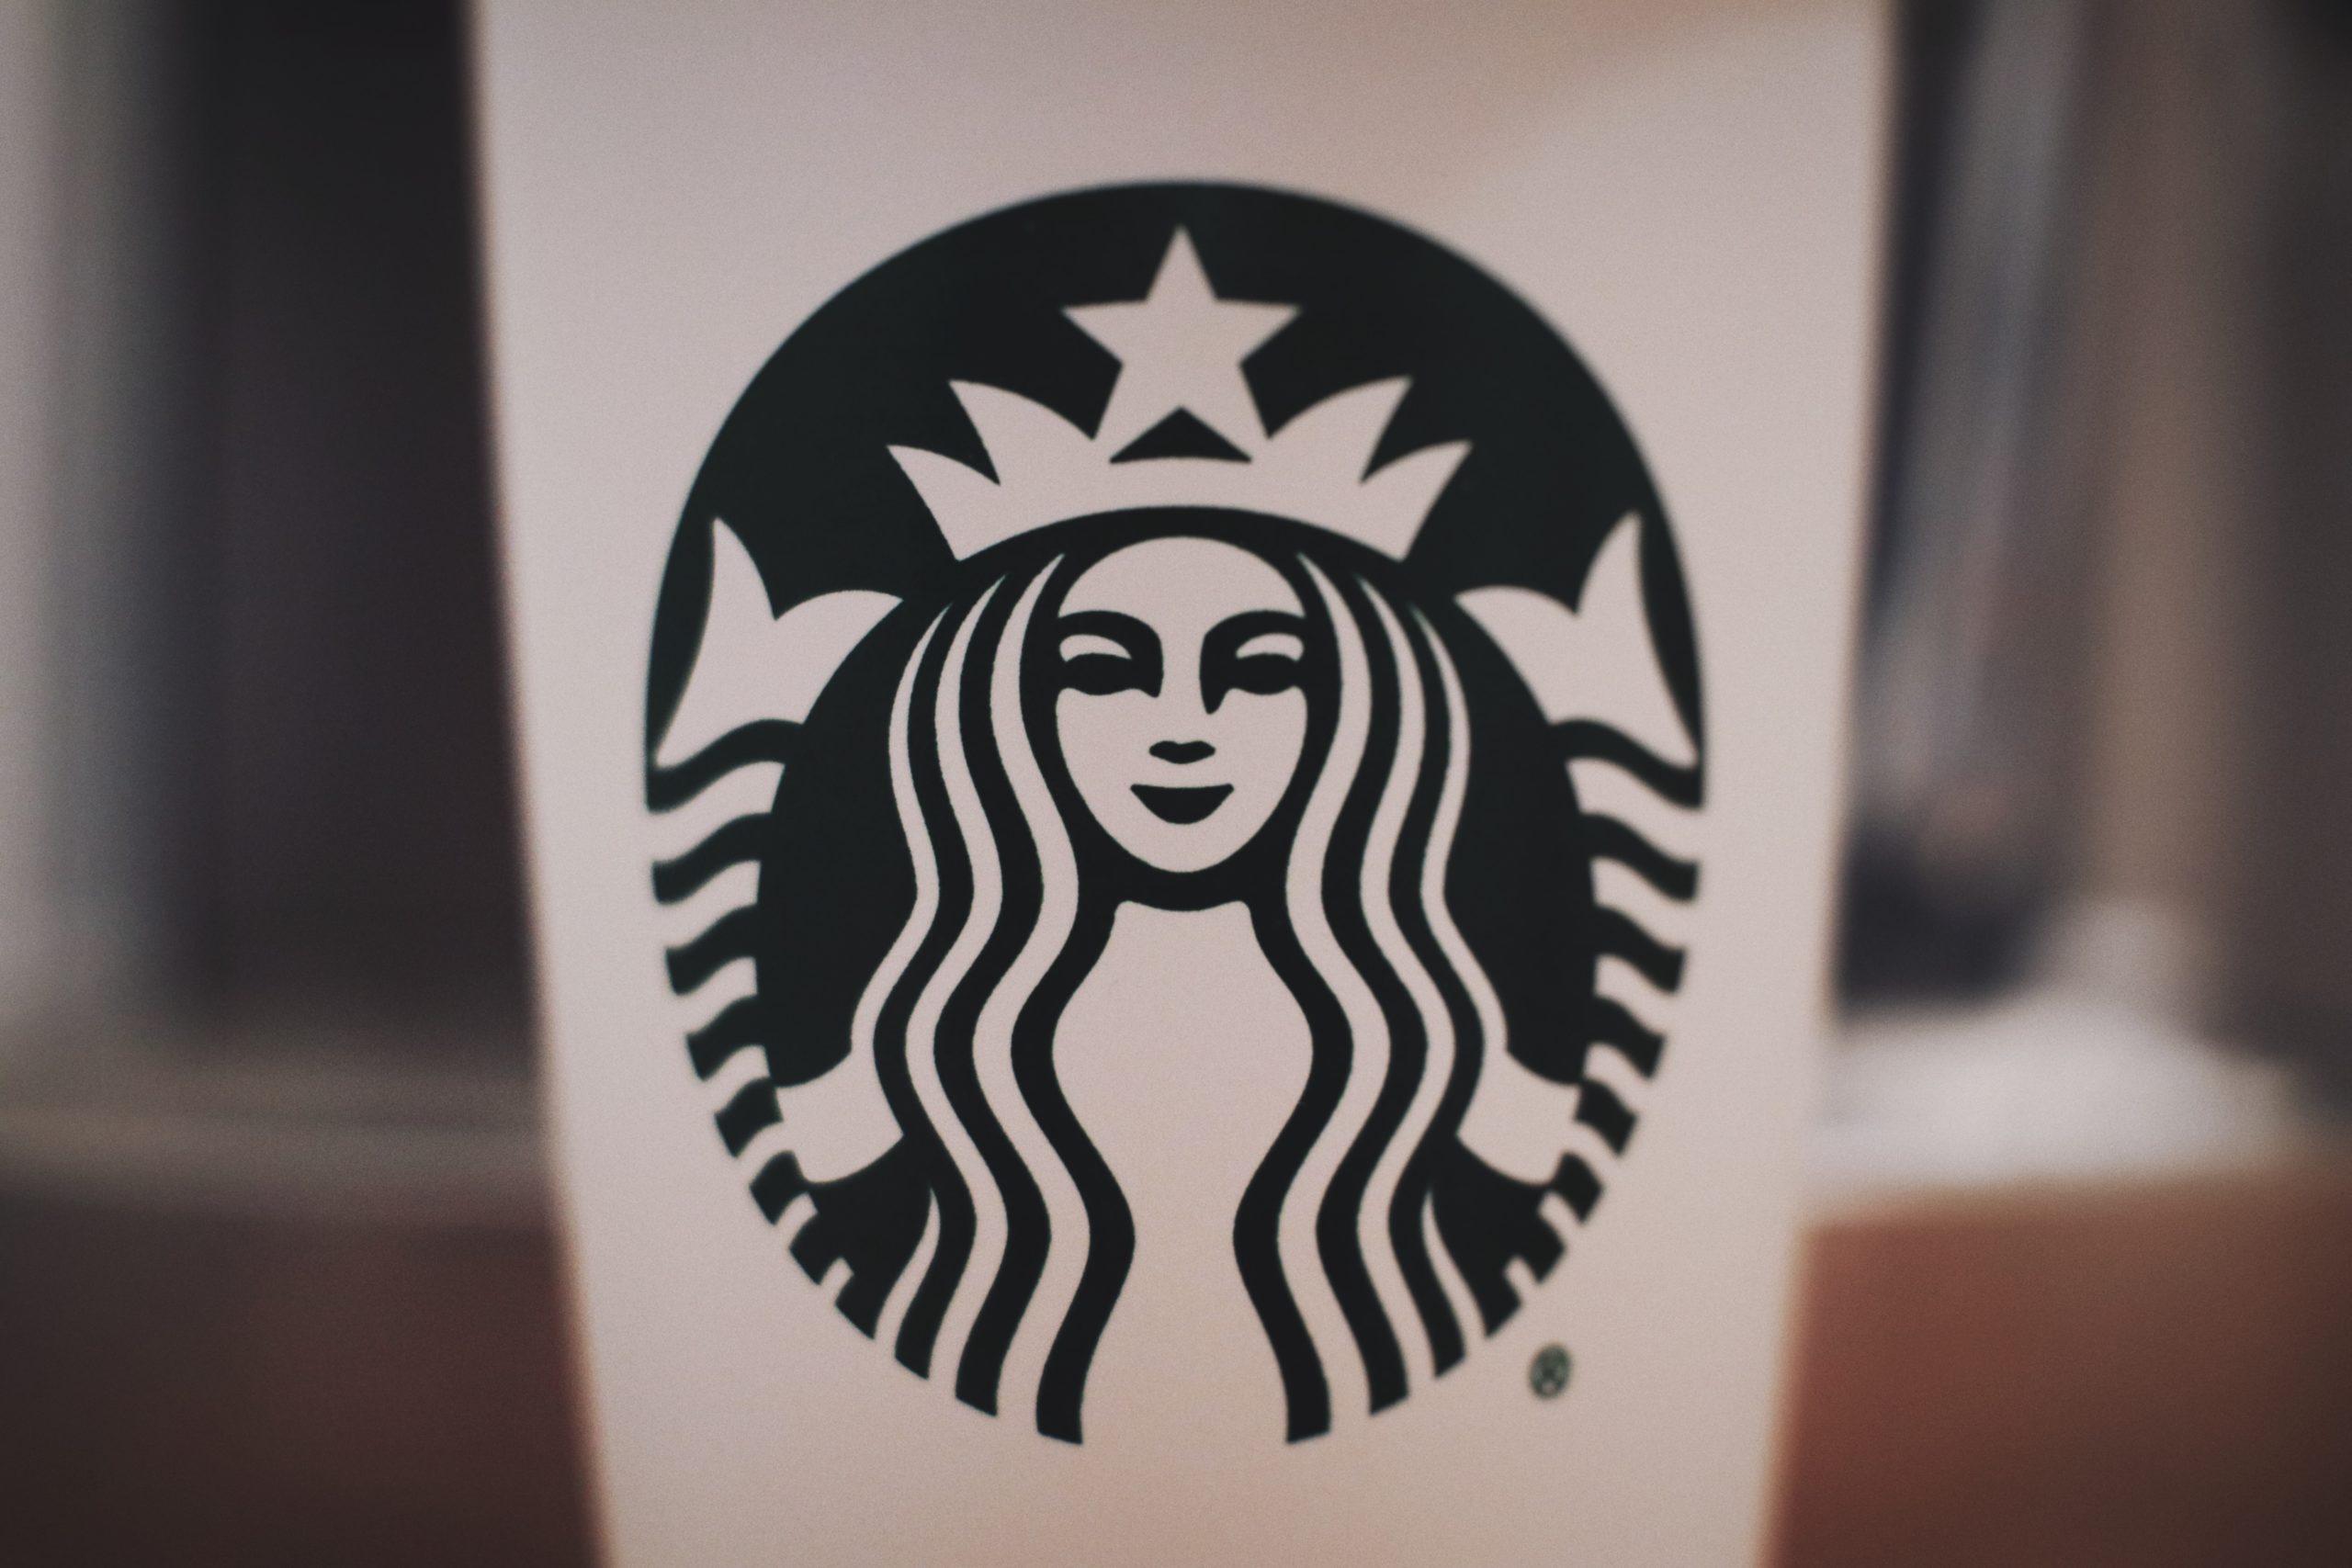 Starbucks logo on a white coffee cup